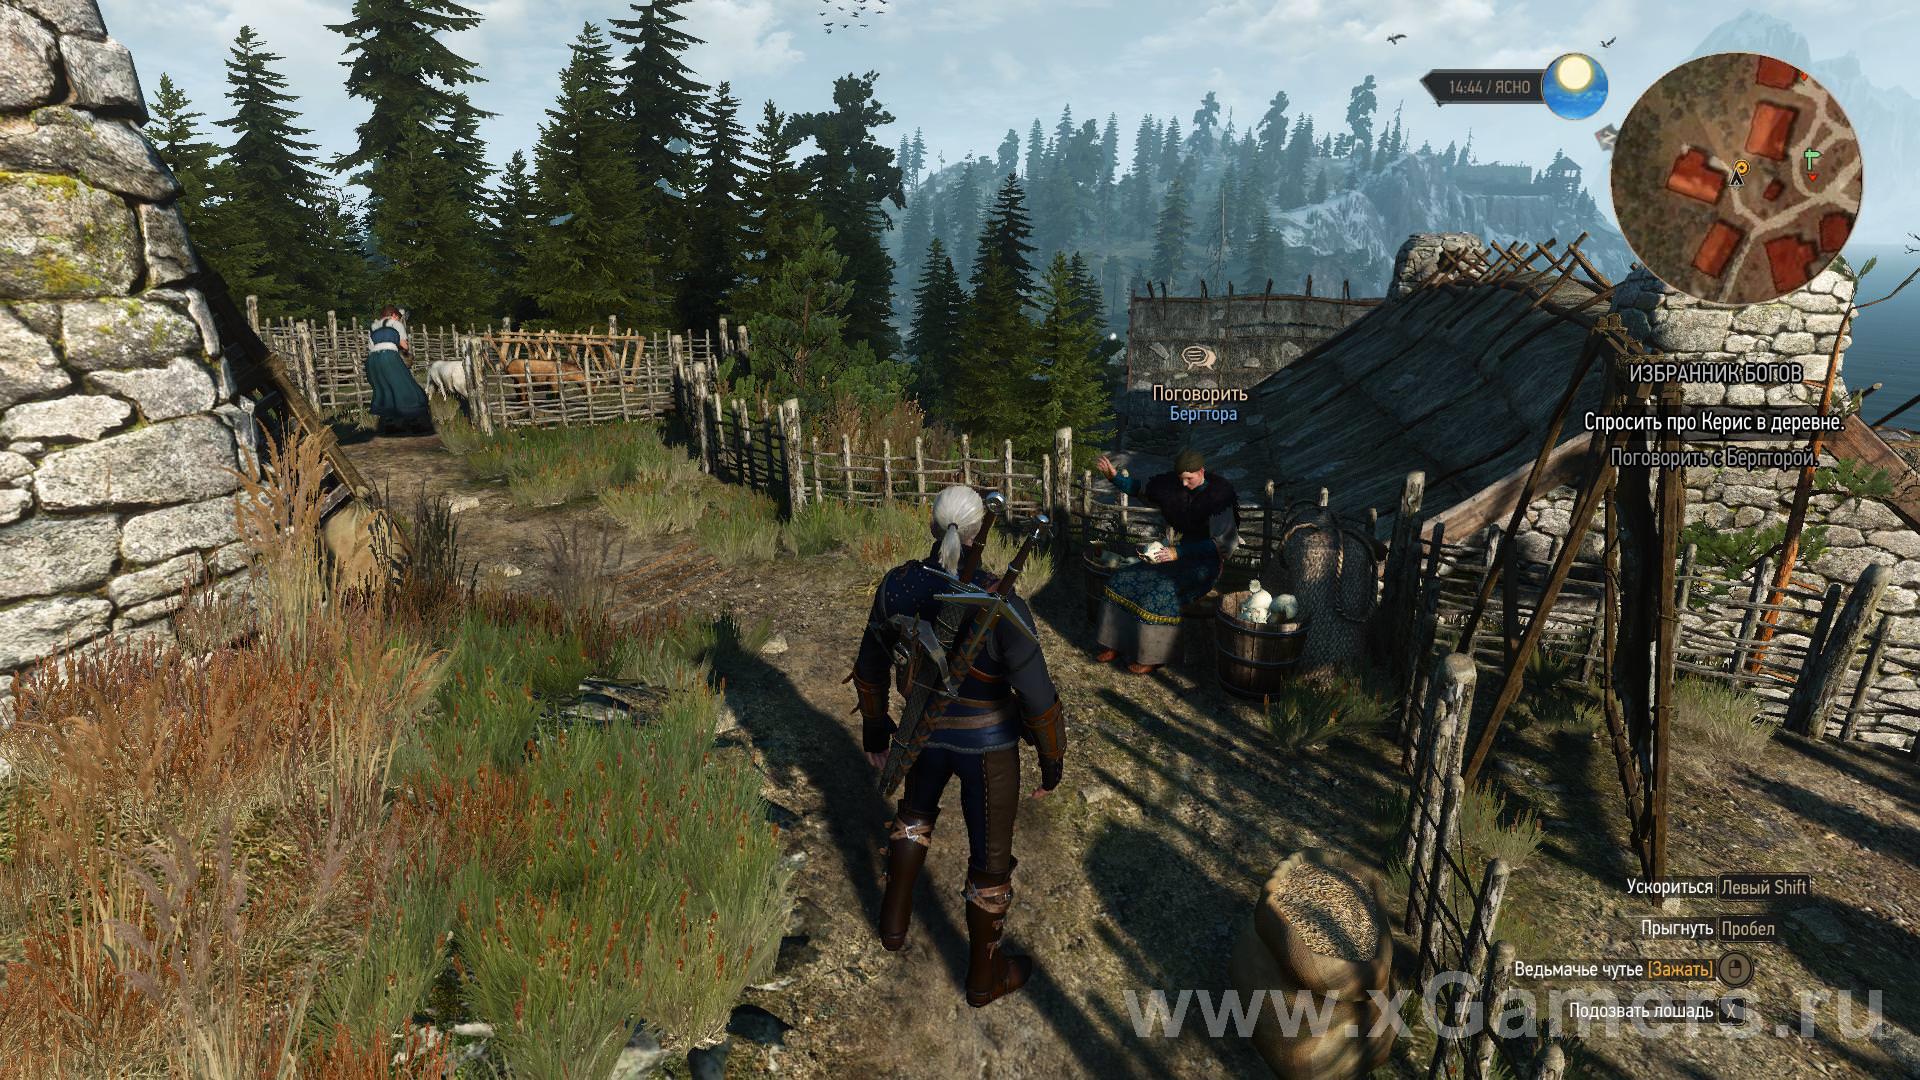 How to find Keris in The Witcher 3